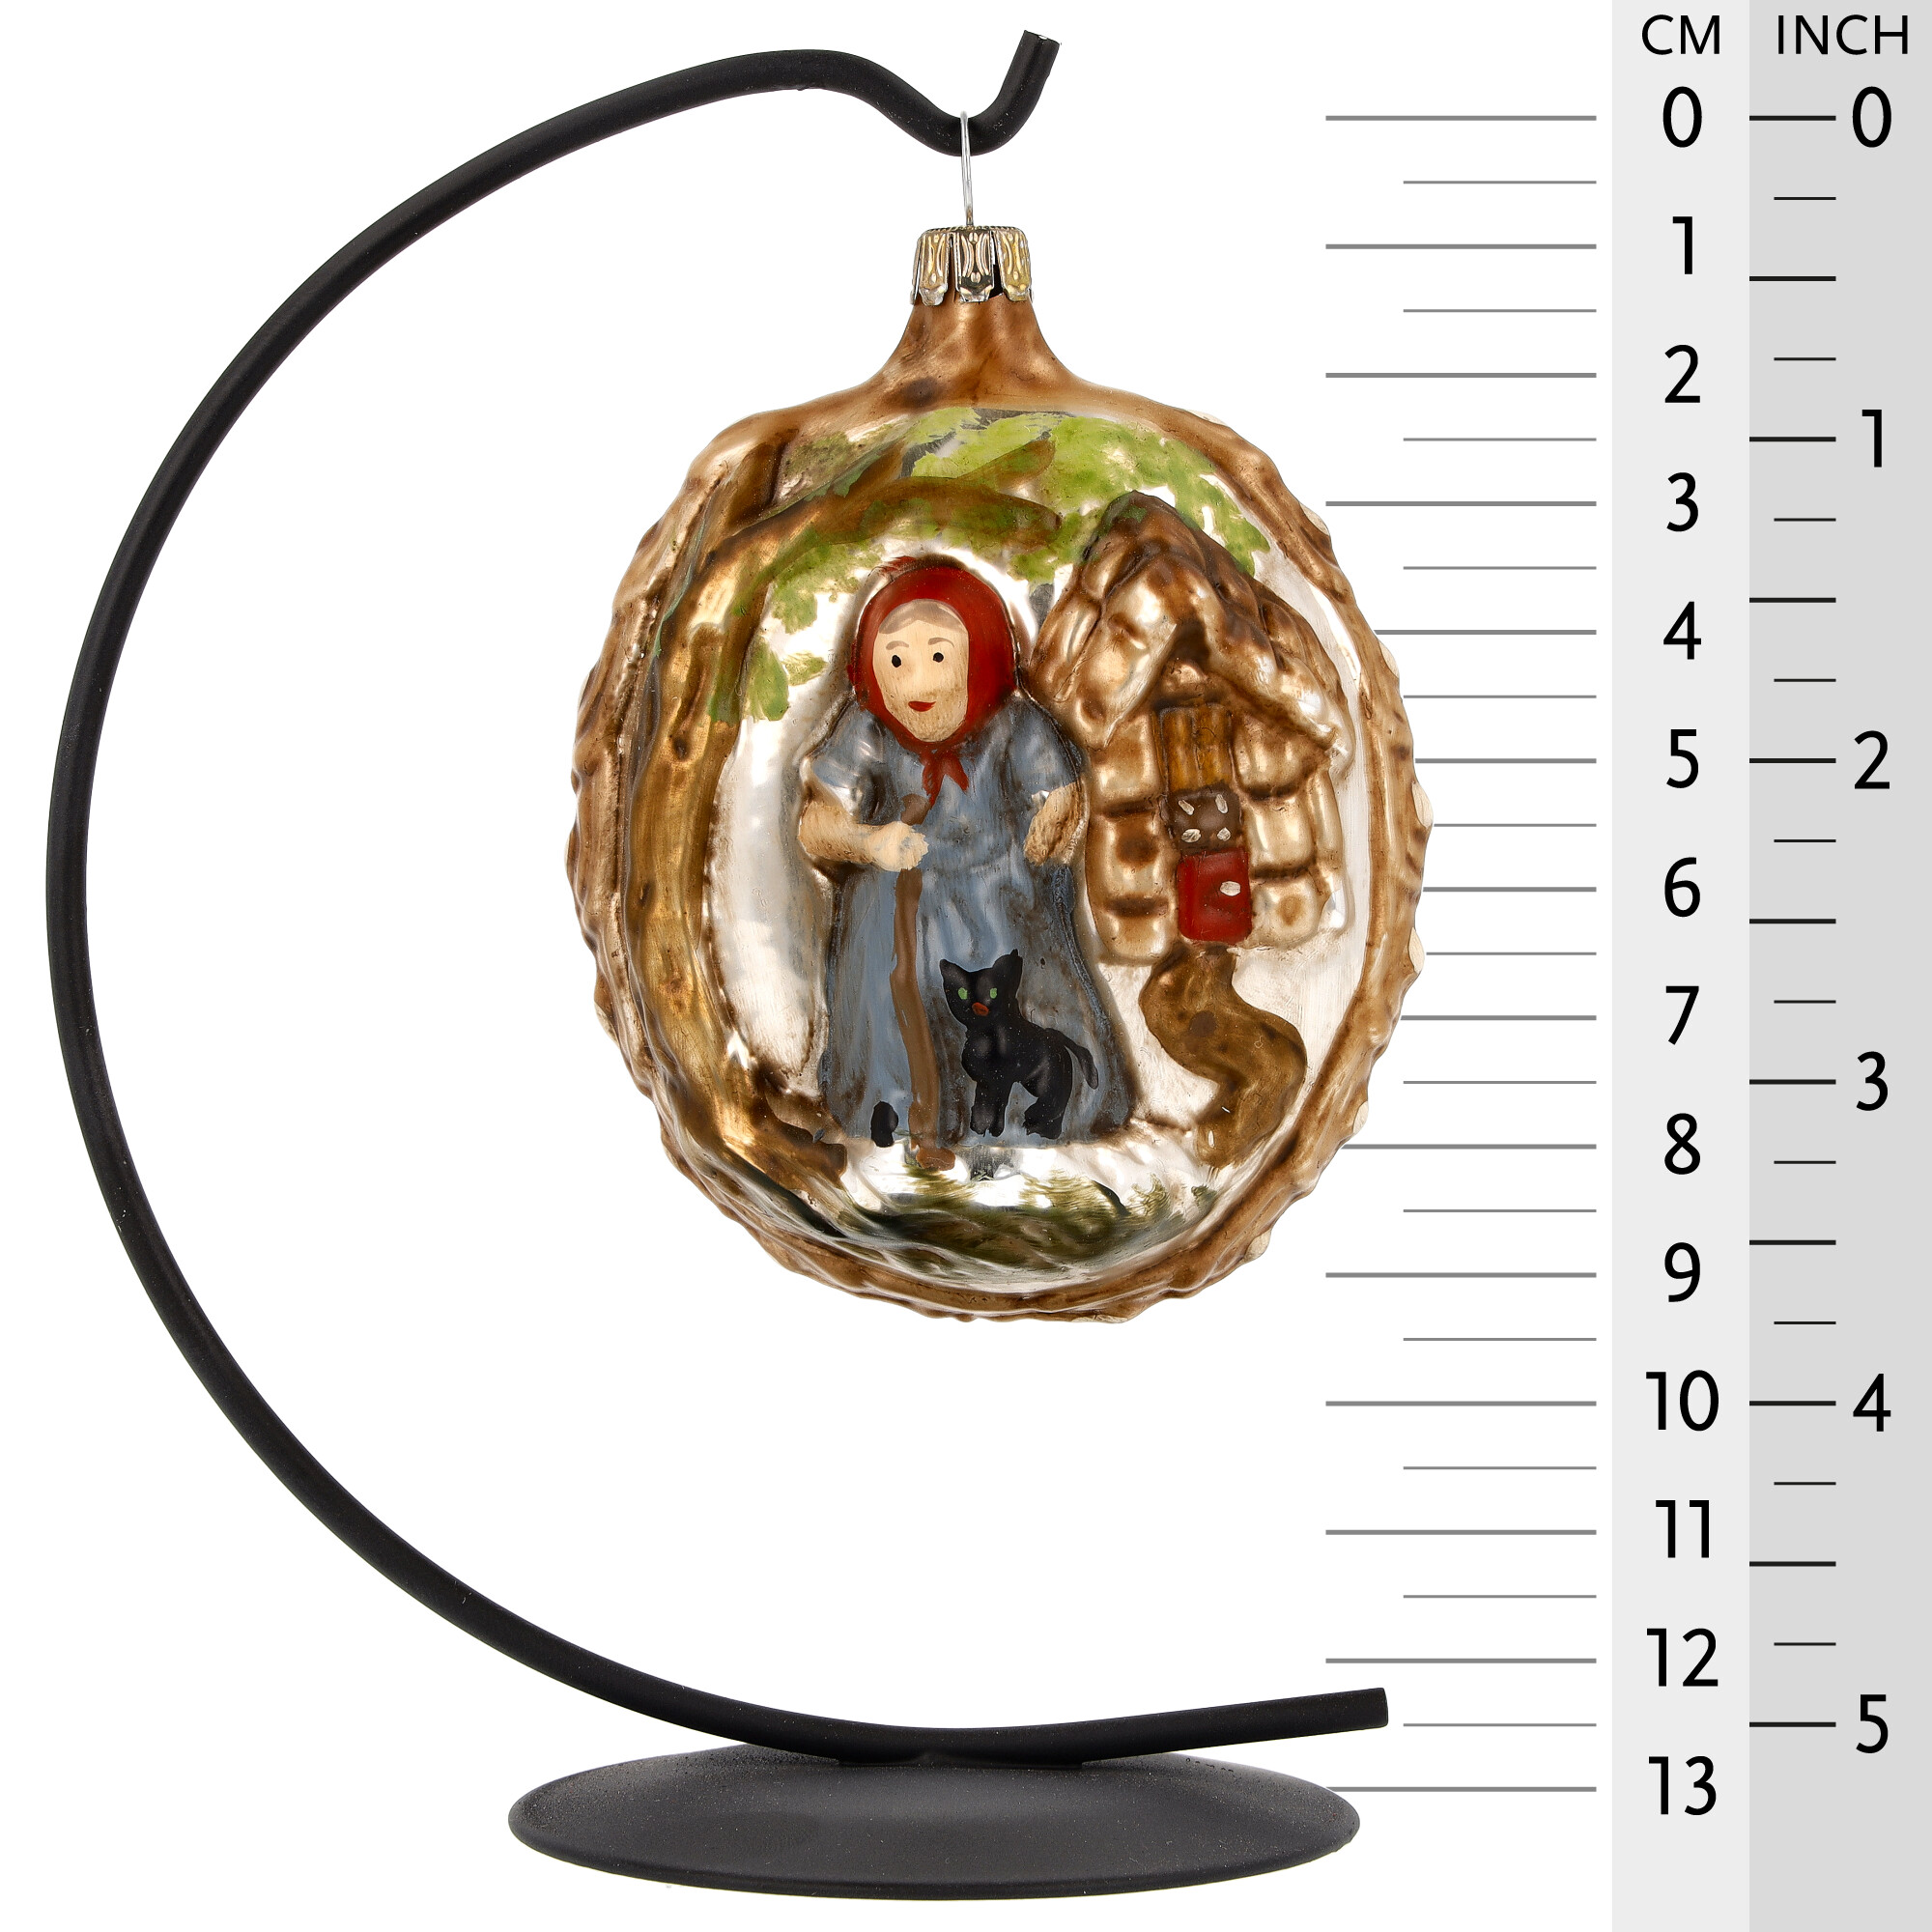 Retro Vintage style Christmas Glass Ornament - Hansel & Gretel with witch